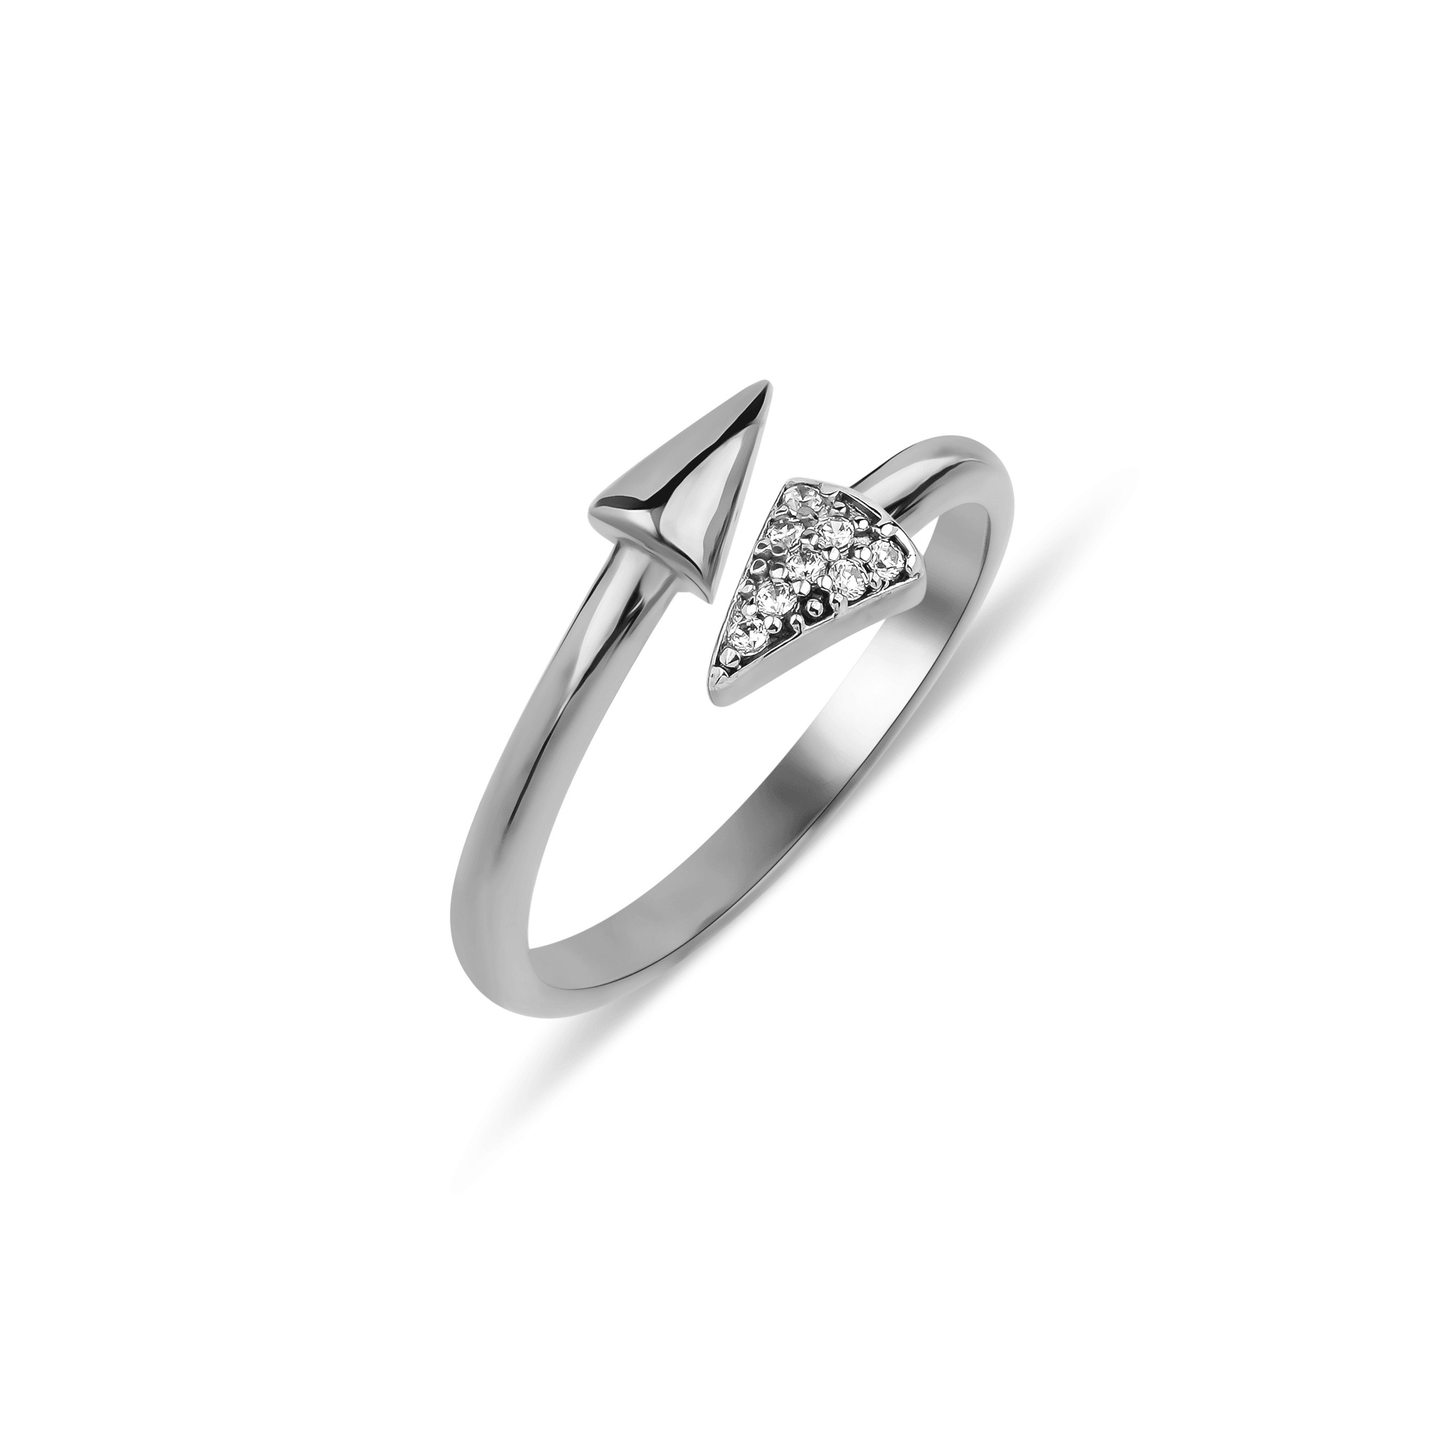 Double Triangle Model Adjustable Silver Ring